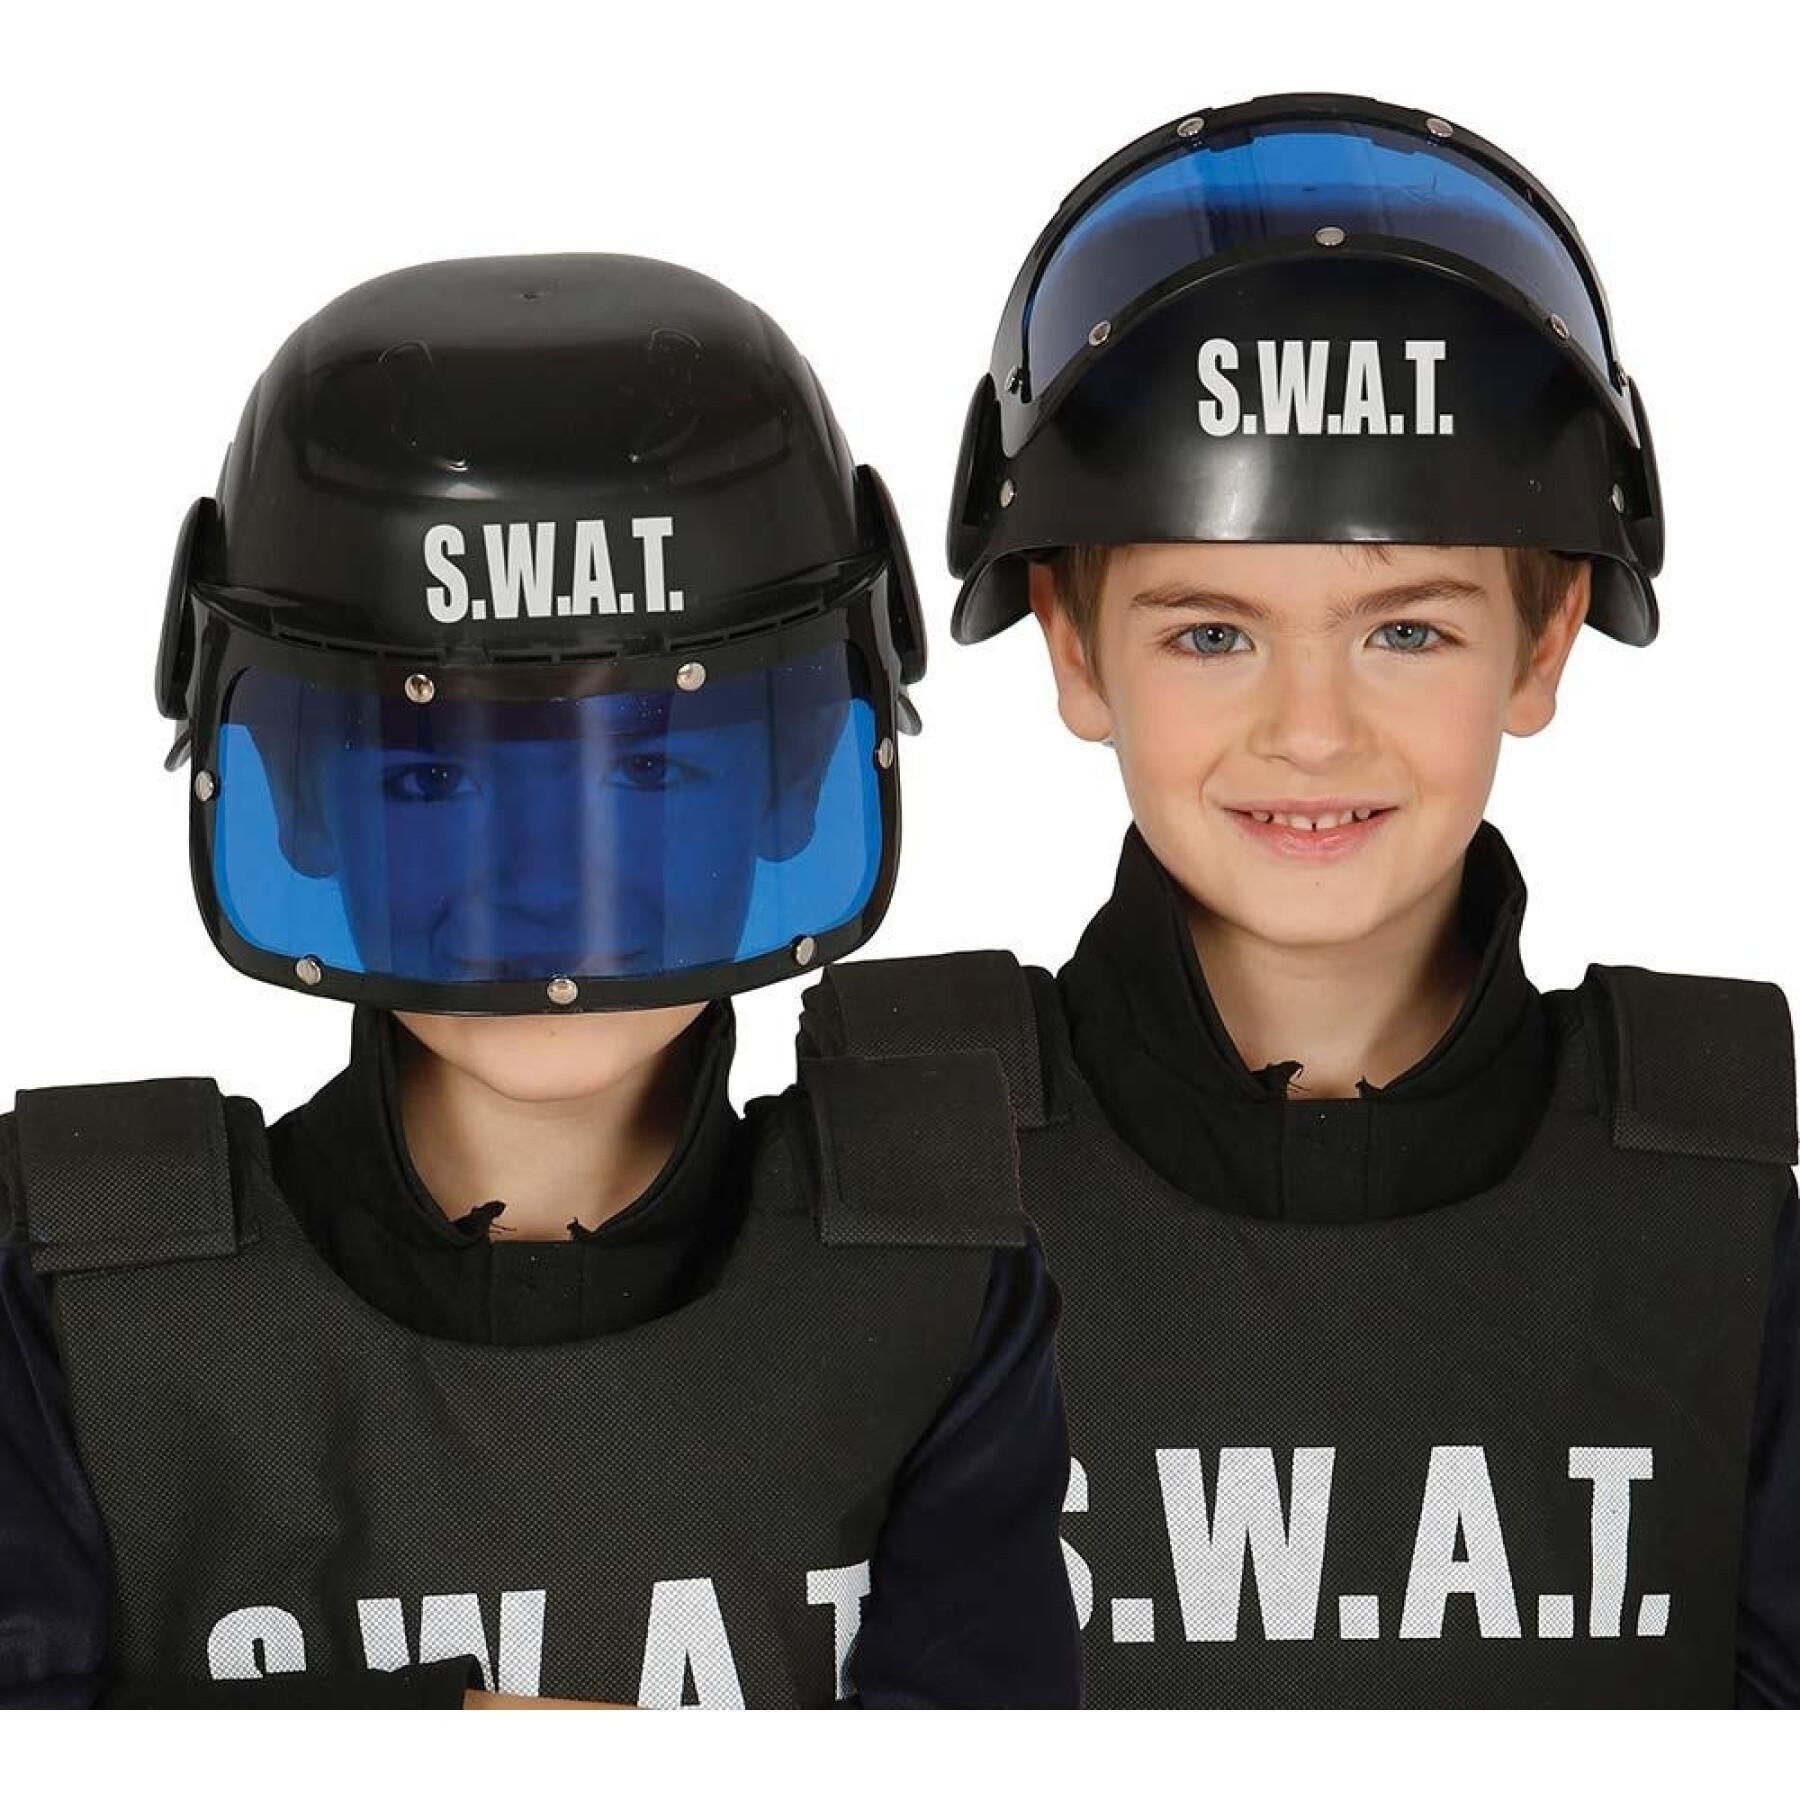 Police disguise SWAT